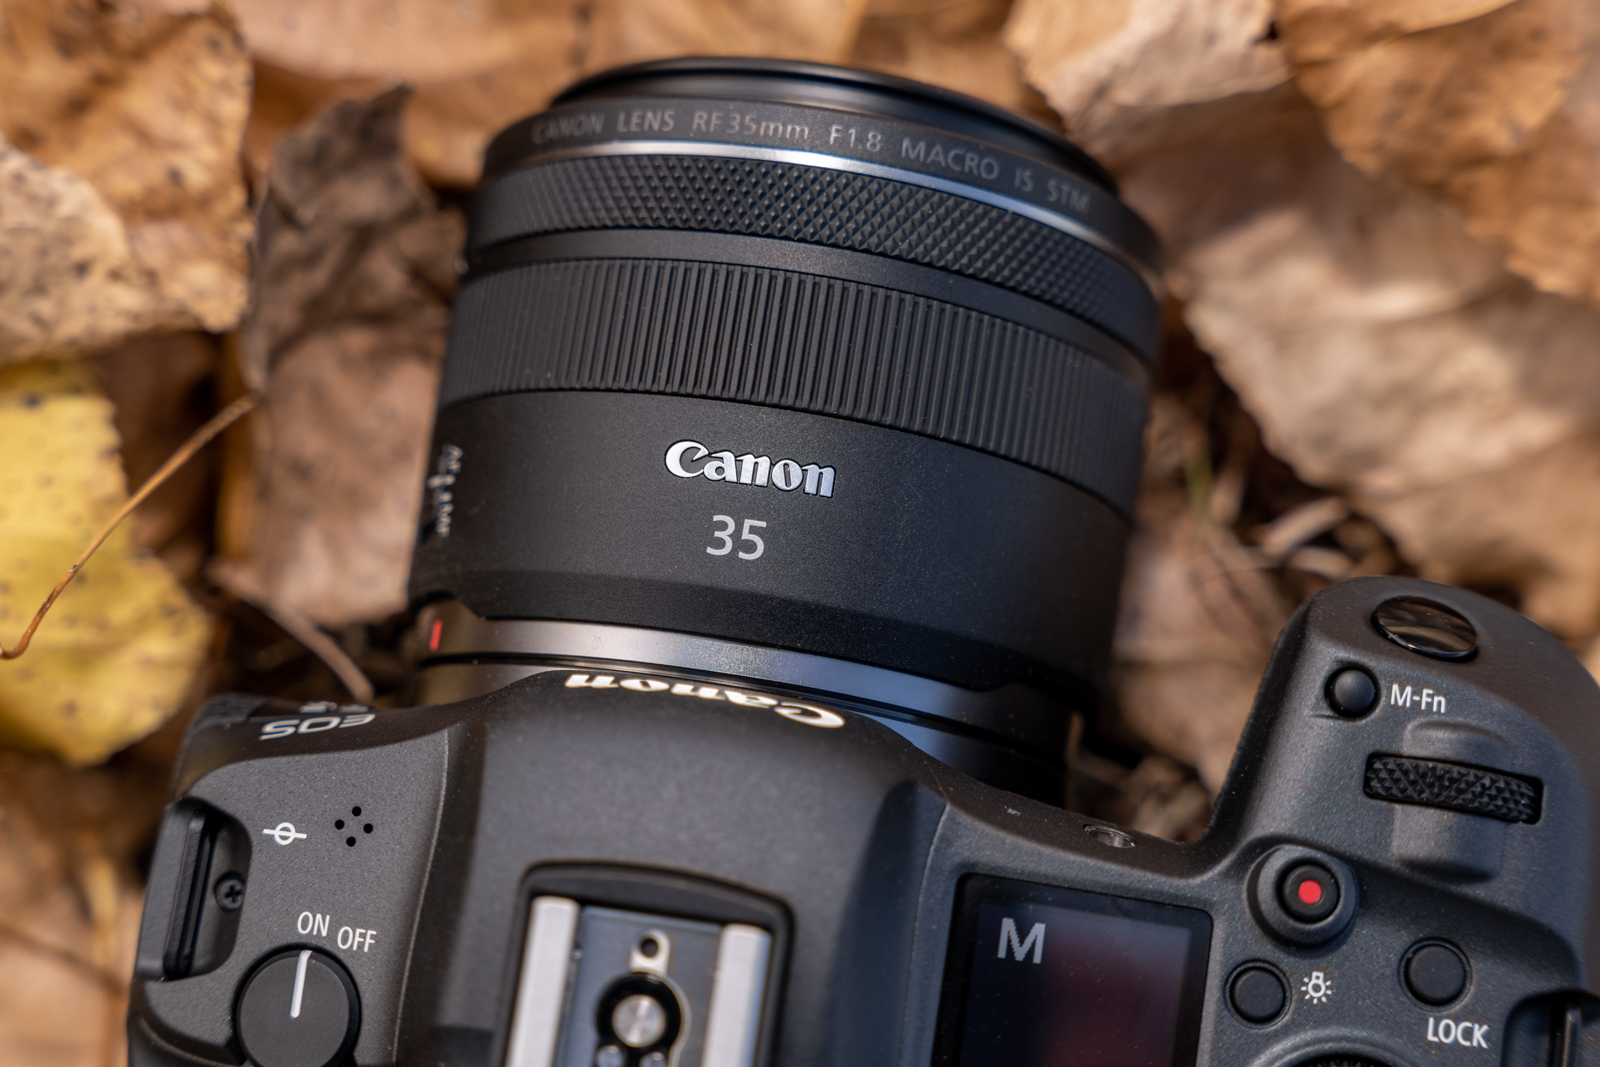 Russia dye Contradict Canon RF 35mm f/1.8 IS Macro STM Review: A good entry-level lens